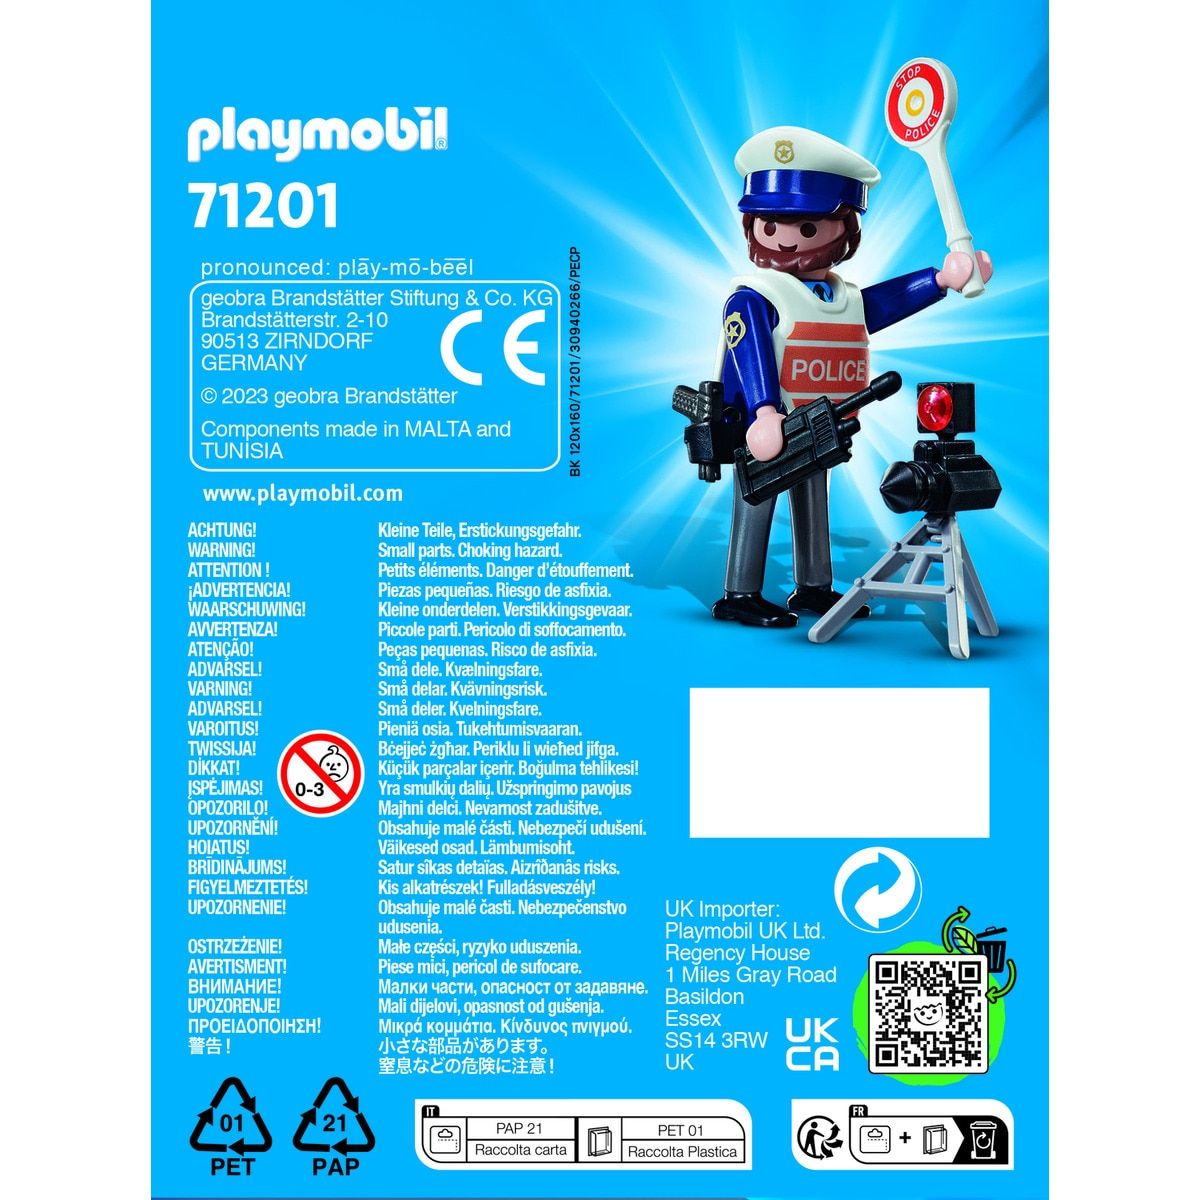 Playmobil City Action 71201 Traffic Police